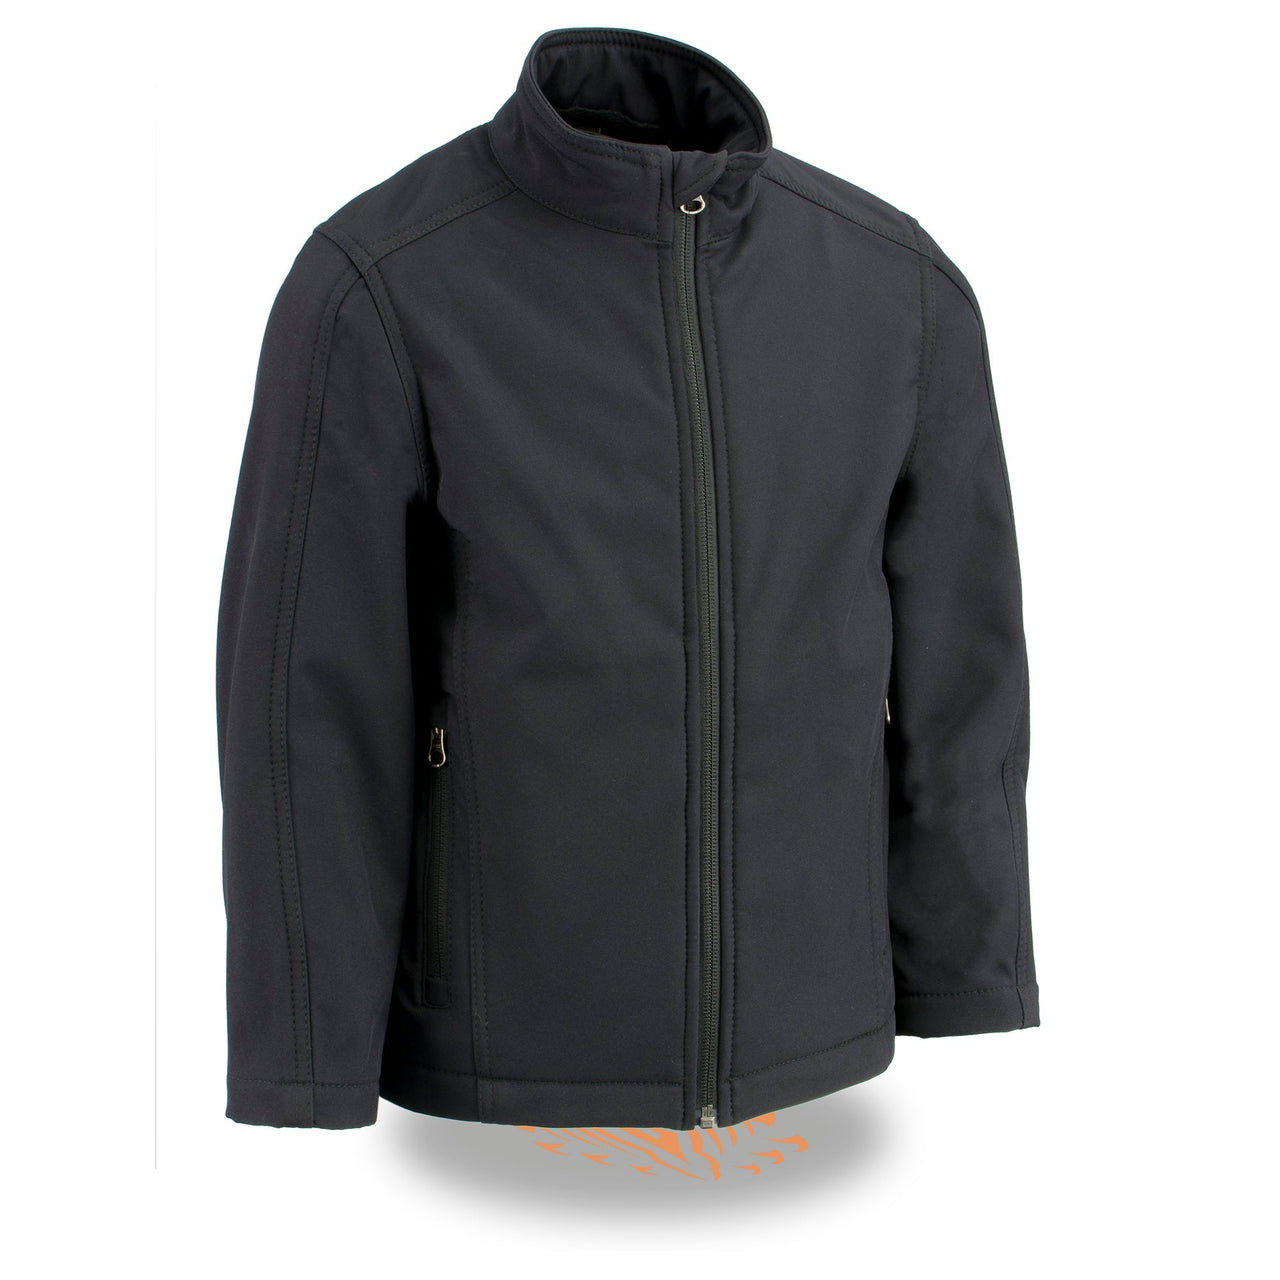 Youth Sized Waterproof Lightweight Zipper Front Soft Shell Jacket - HighwayLeather